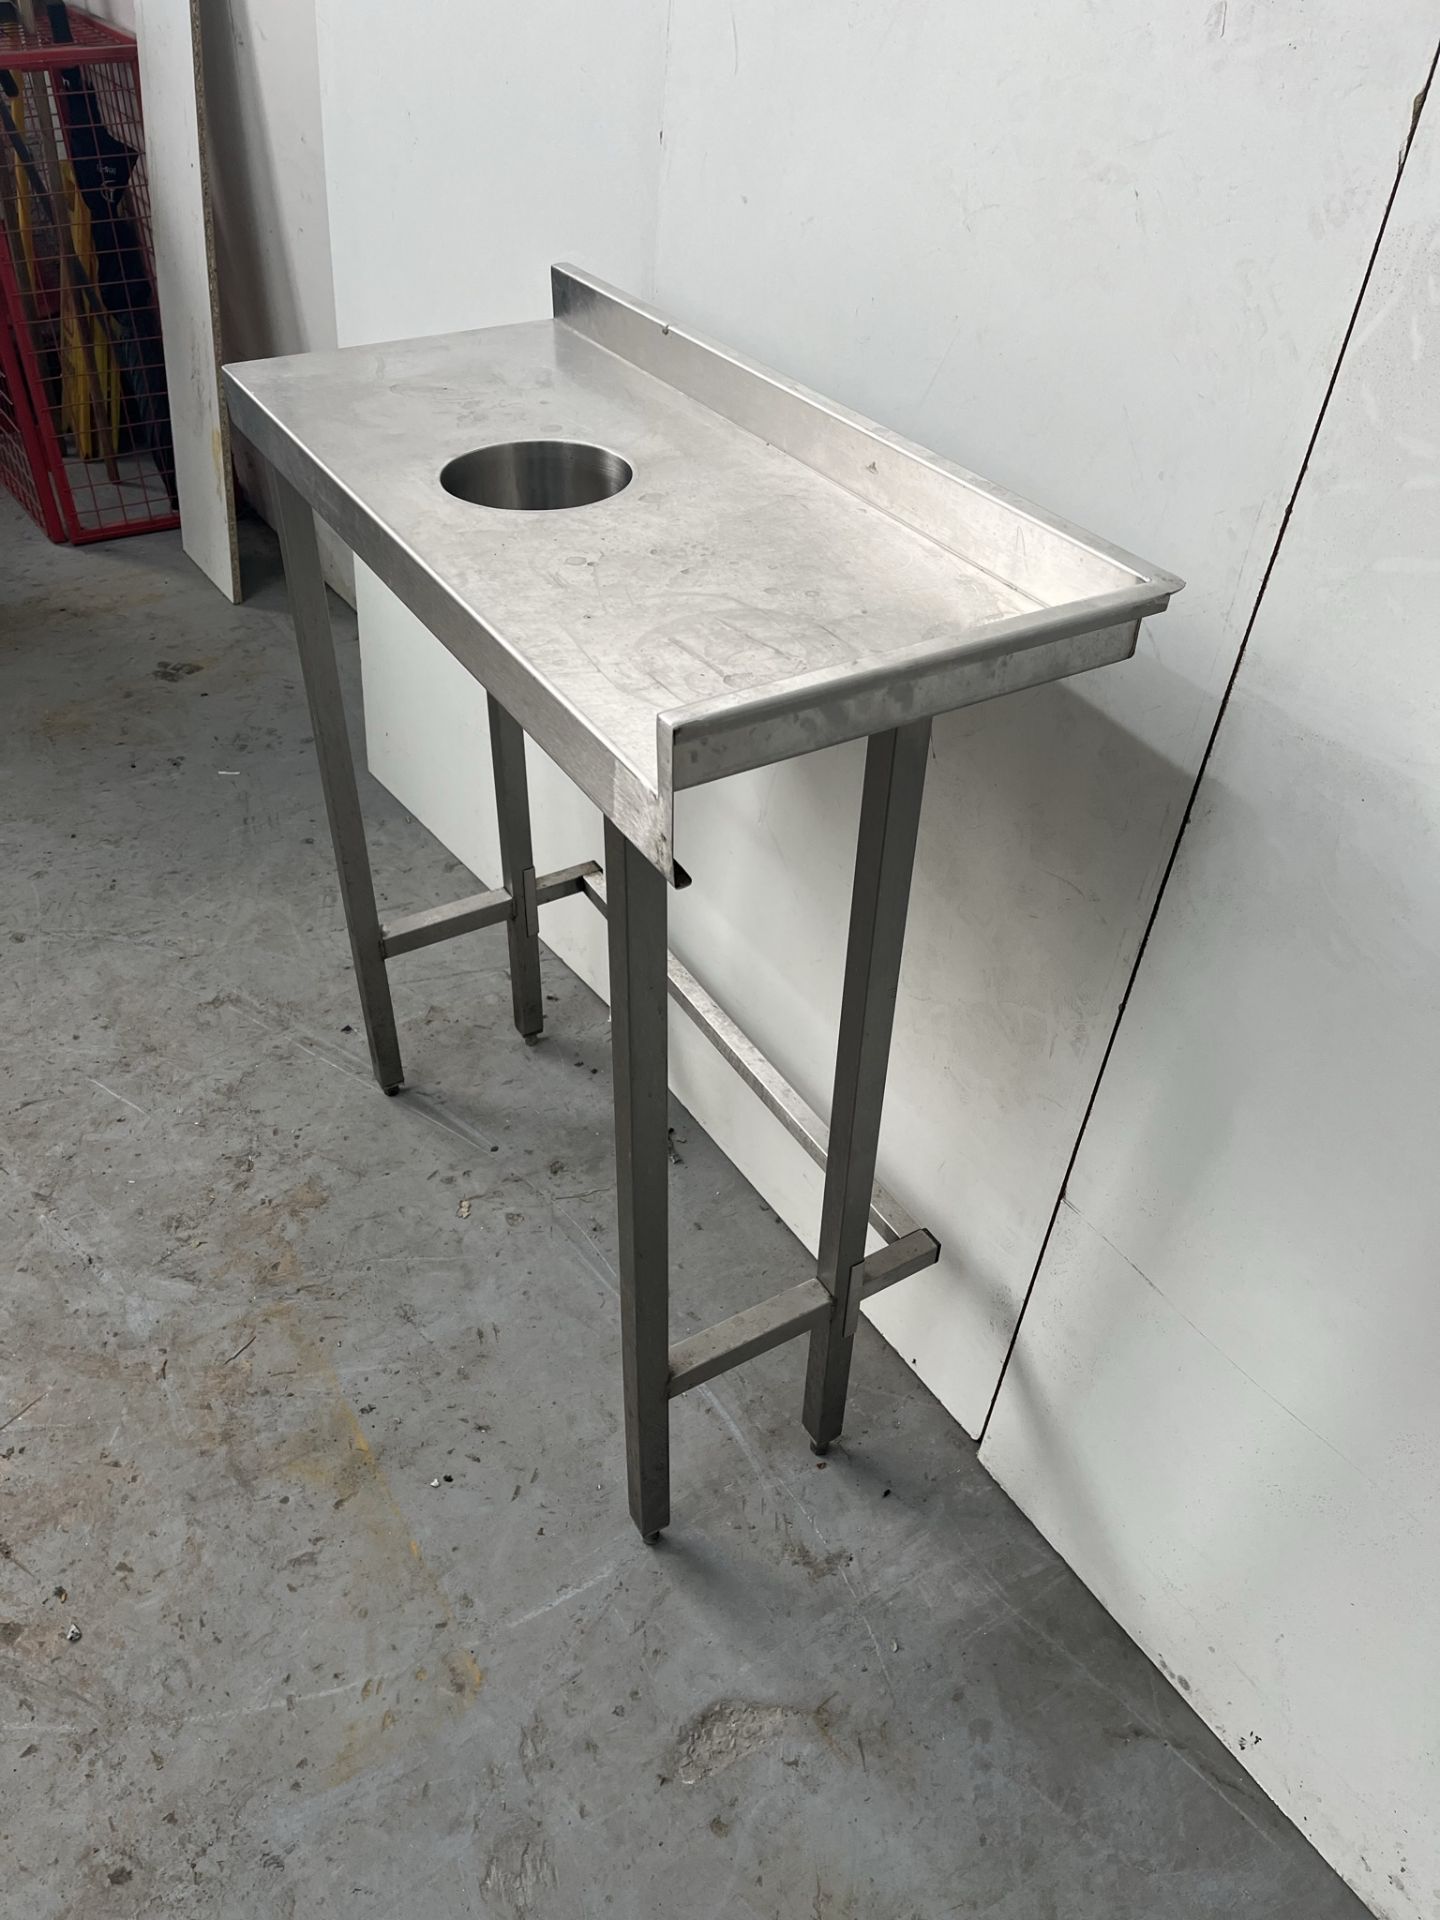 850mm Stainless Steel Catering Preperation Table With Waste Disposal Hole - Image 4 of 7